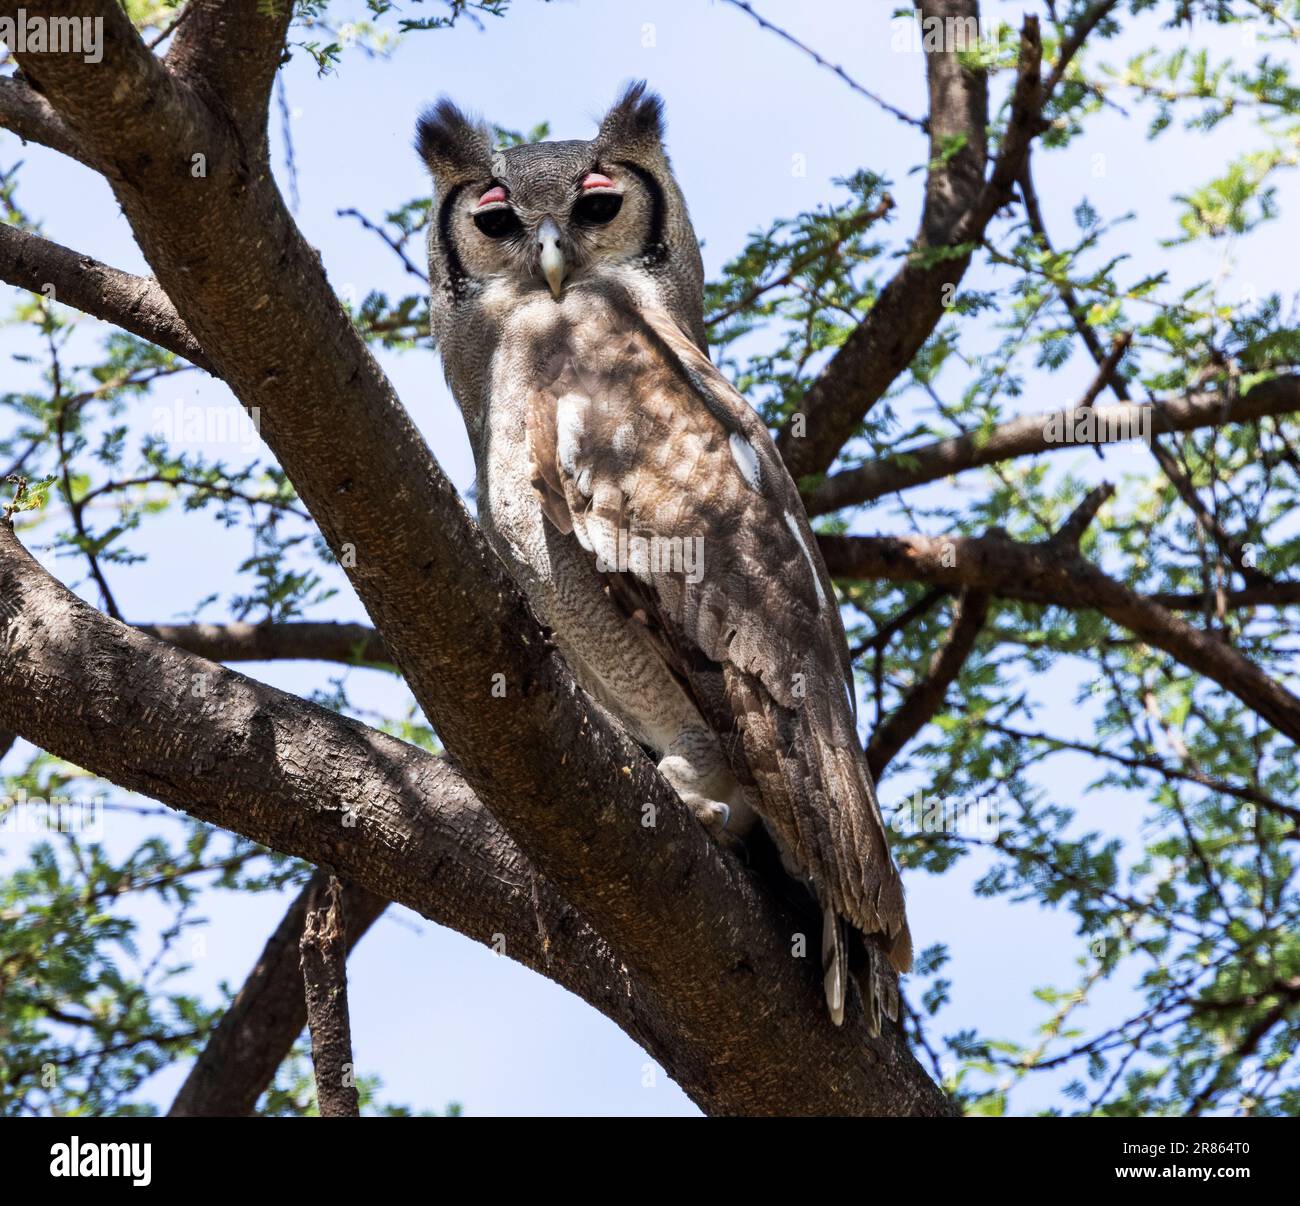 The Verreaux's or Giant Eagle Owl is the largest of the family in Africa. They are powerful nocturnal predators of mammals and larger birds. Stock Photo